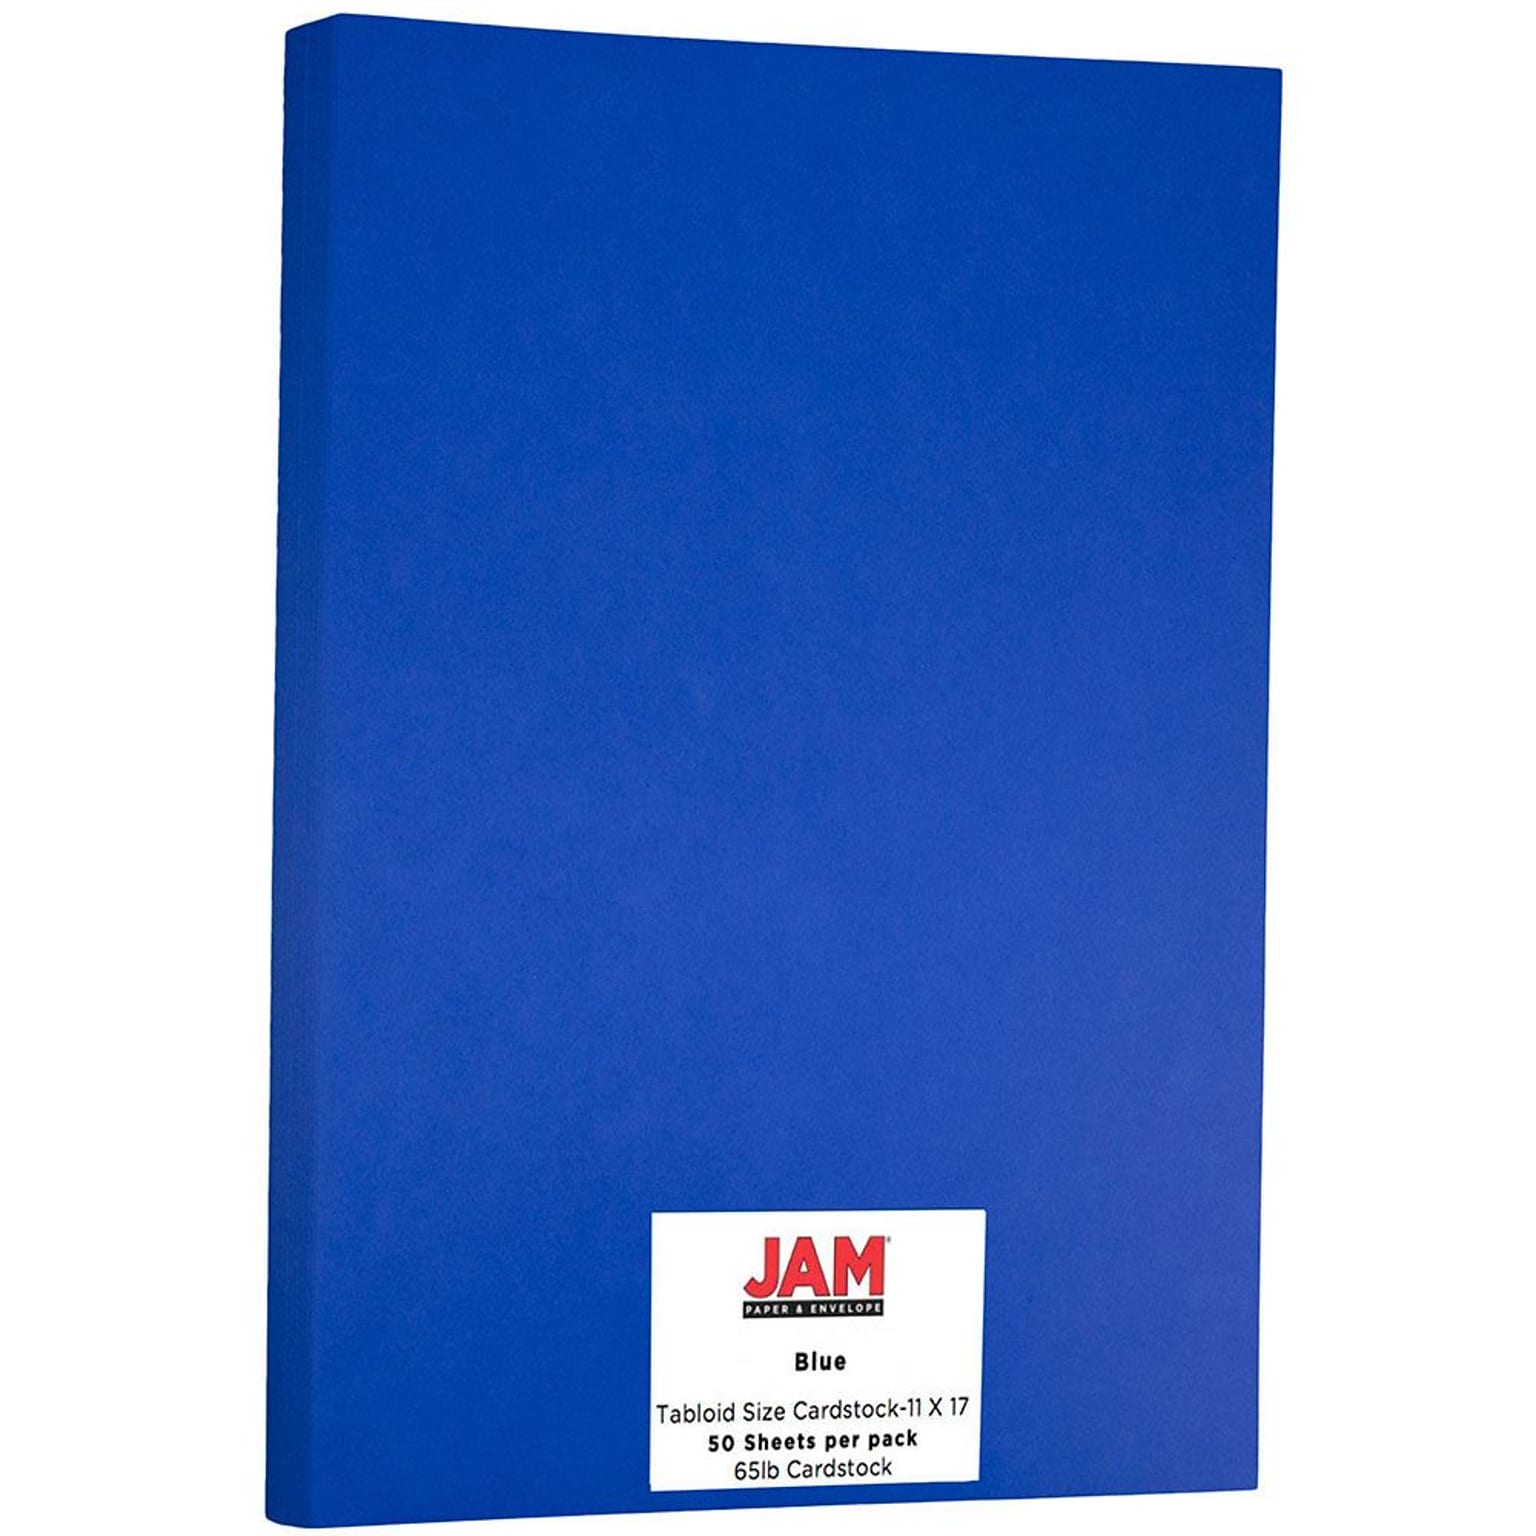 JAM Paper® Ledger 65lb Colored Cardstock, Tabloid Size, 11 x 17, Presidential Blue Recycled, 50 Sheets/Pack (16728477)